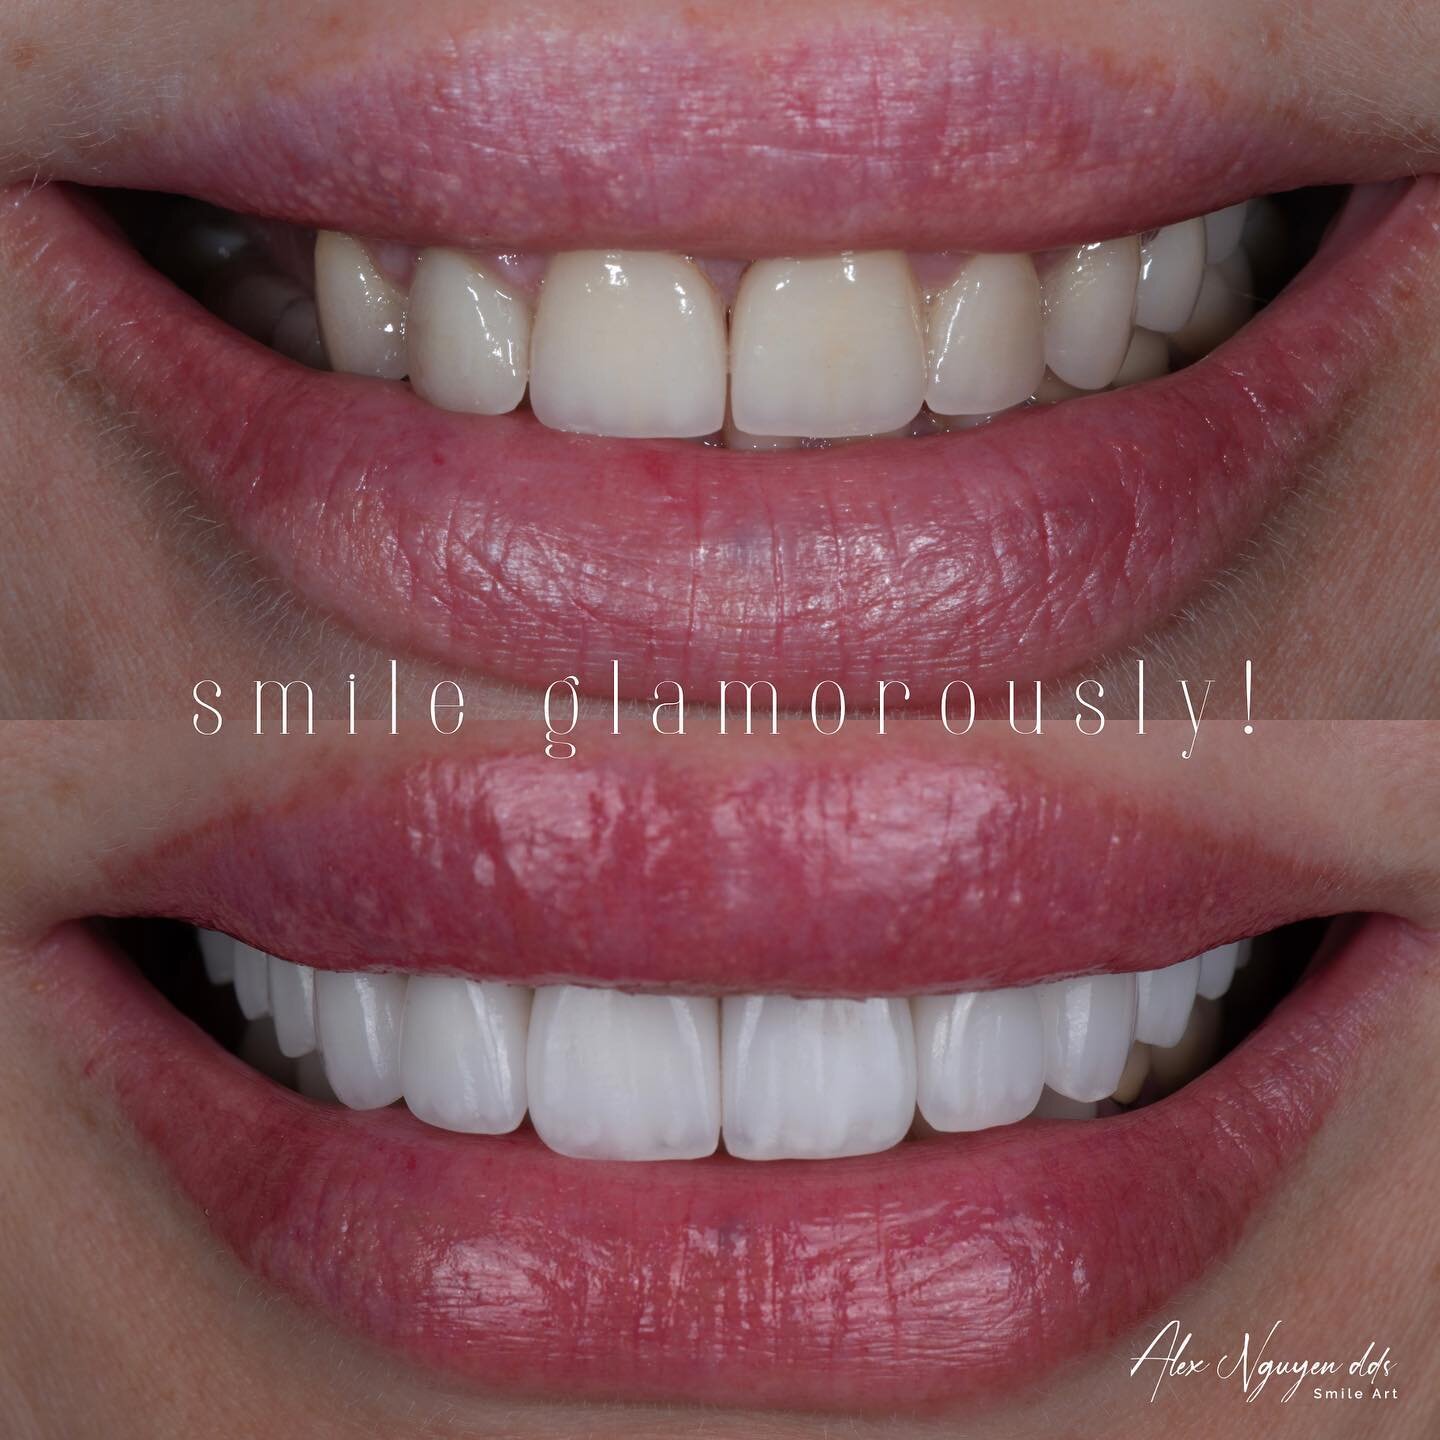 Multiple implants to replace missing teeth; multiple veneers and crowns to brighten up and glamourize this smile.  That was the patient&rsquo;s wish, and she was extremely pleased with the result. 
-
-
-
-
#hollywoodsmile #brightsmile #realisticvenee